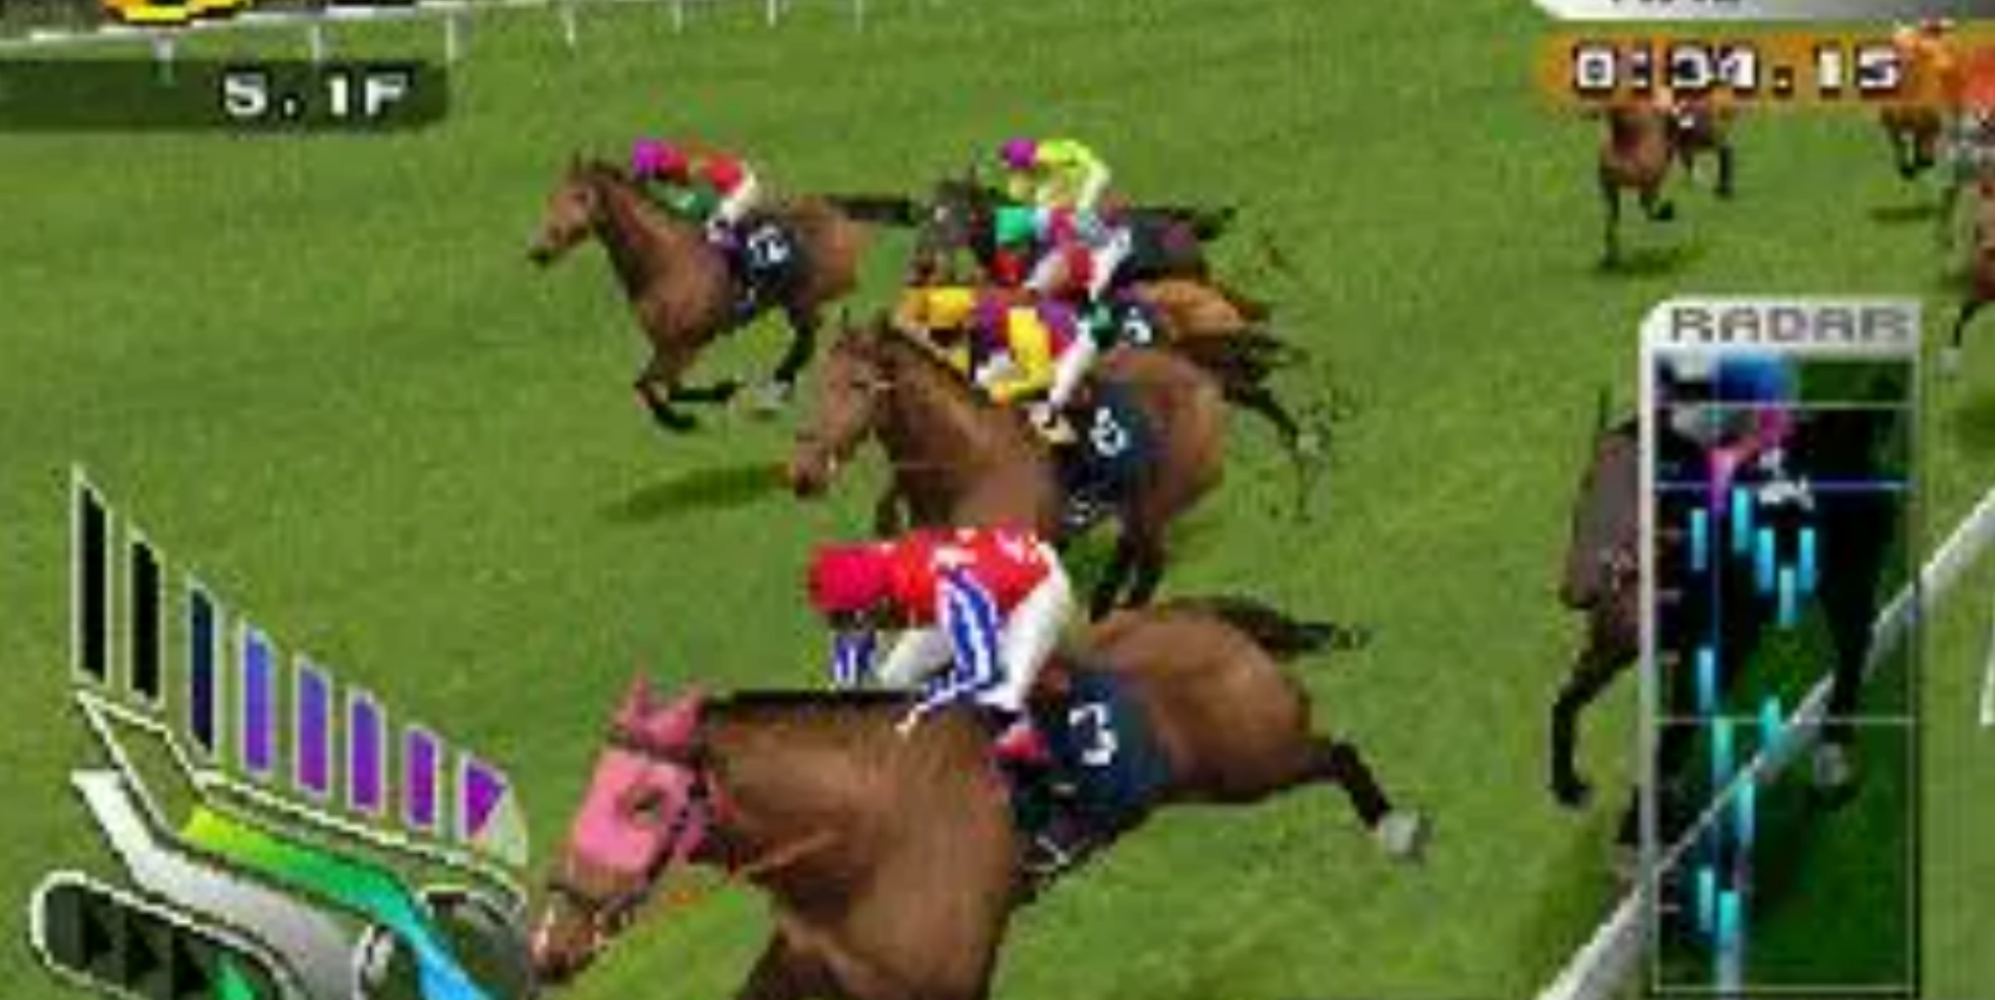 gallop racer ps1 showing multiple horses and jockeys racing for position on a grass track